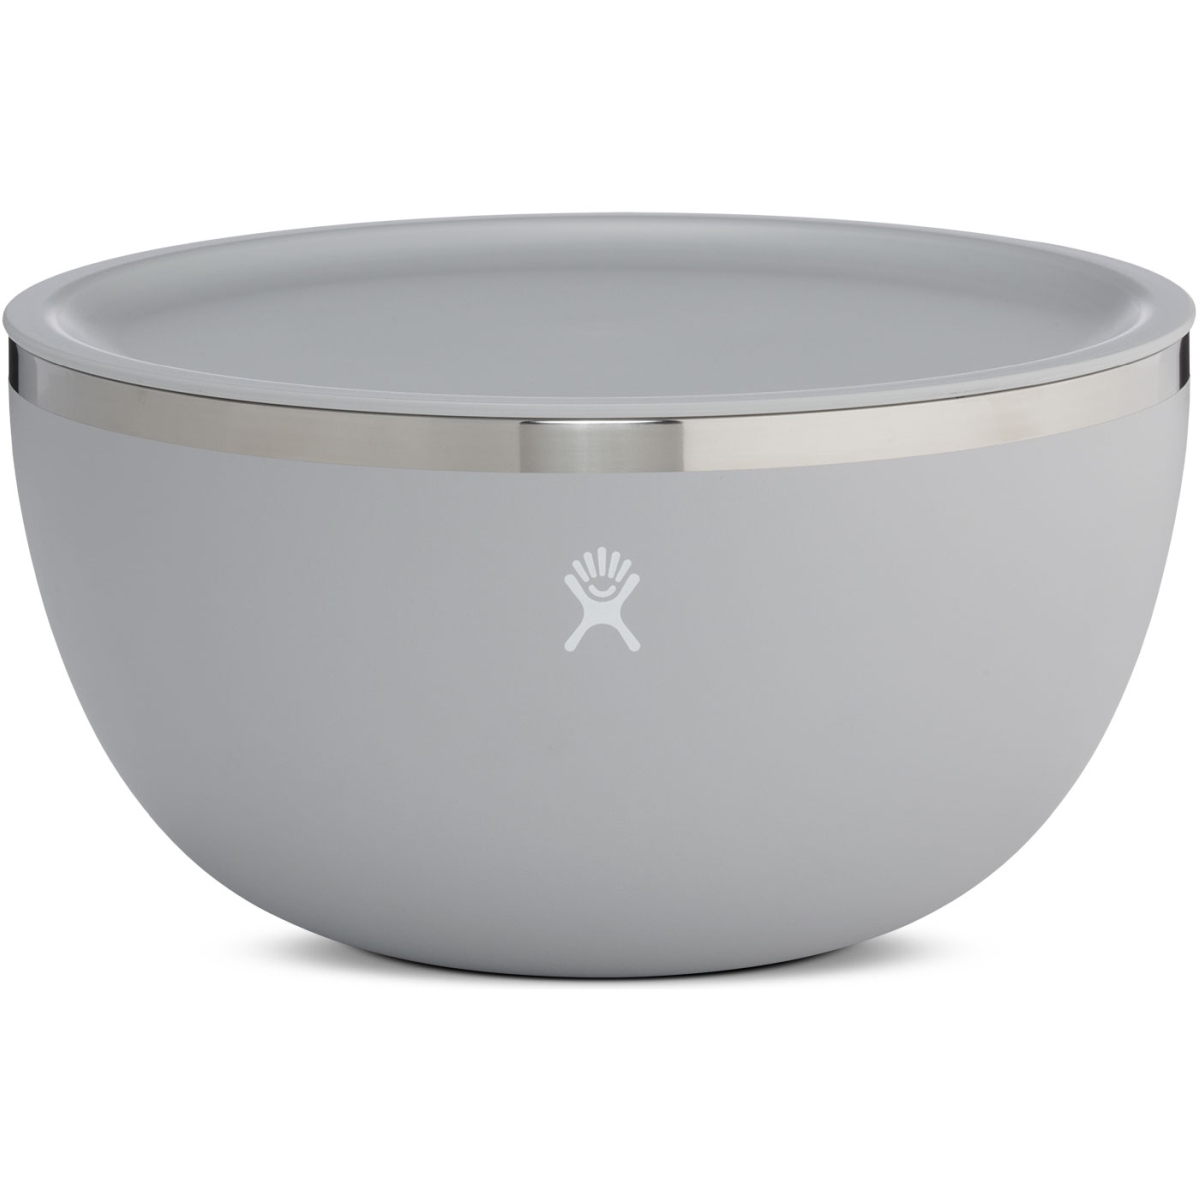 Image of Hydro Flask 3 qt Serving Bowl with Lid - Birch